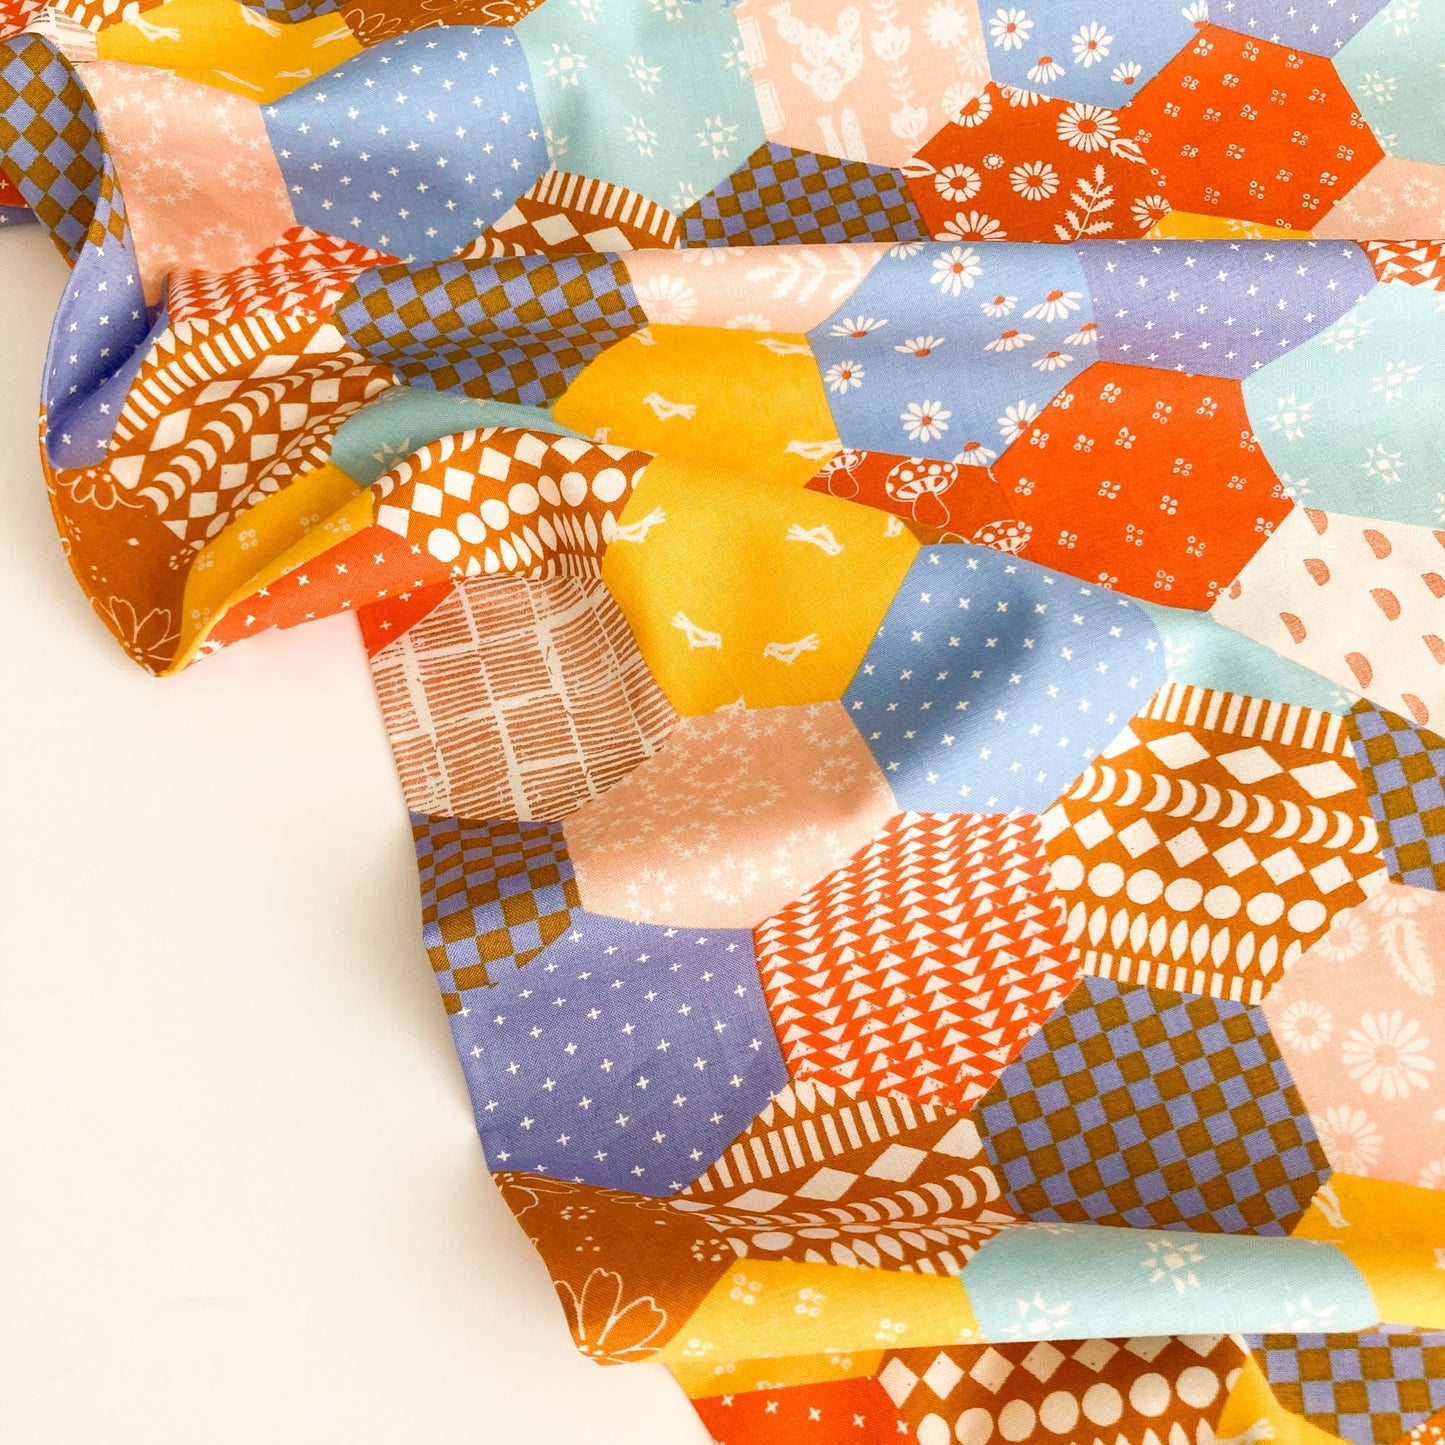 Ruby Star Society 'Honey' Quilting Cotton: 'Hexie Cheater' in Dusk